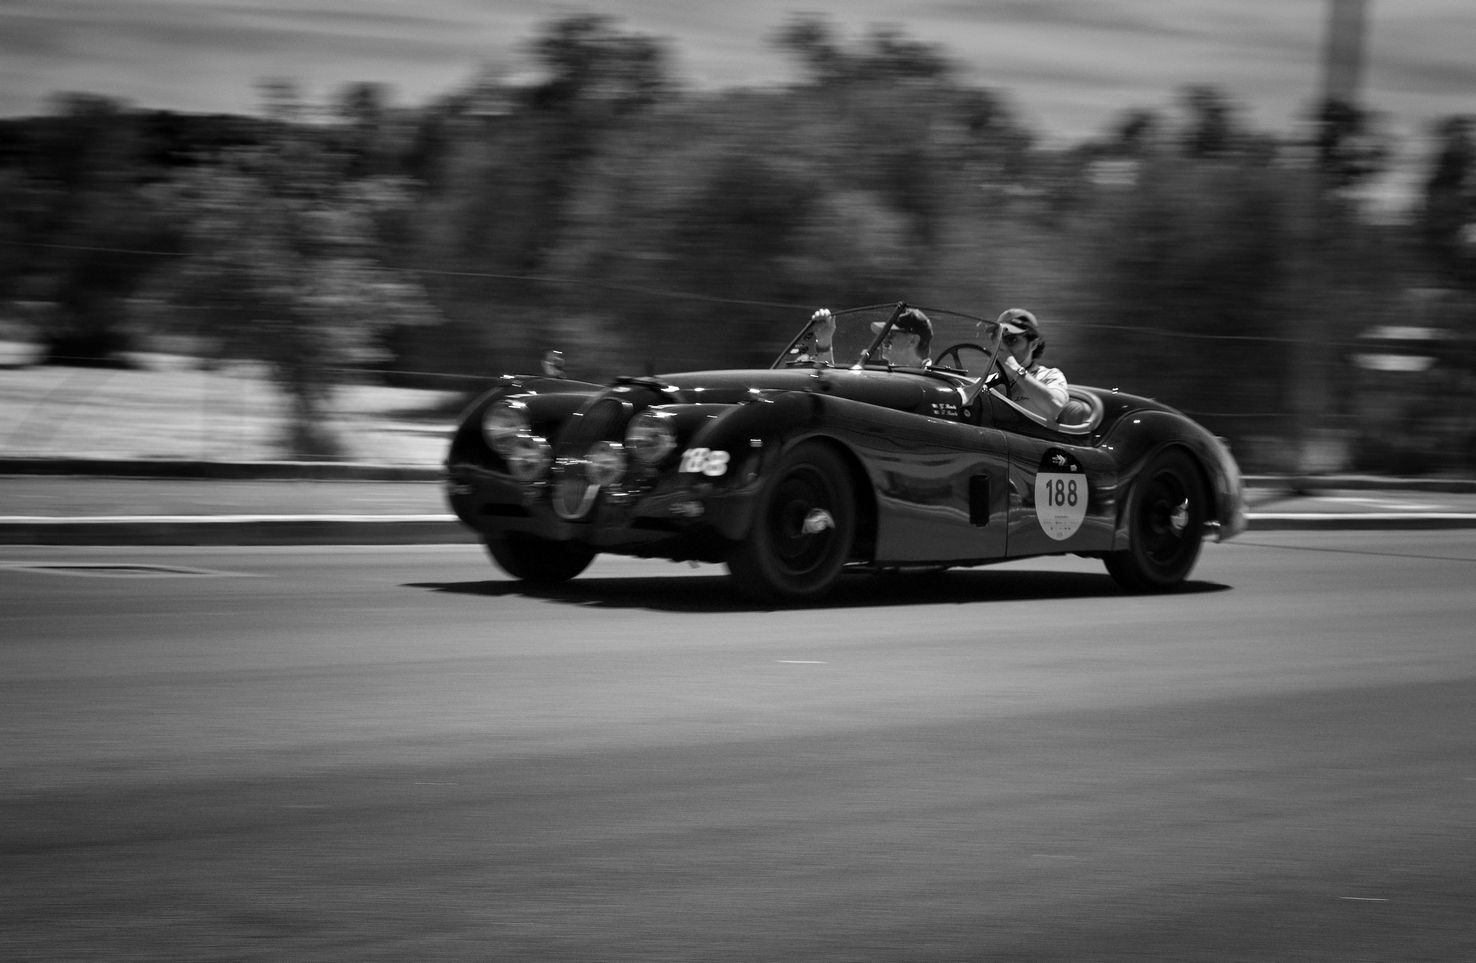 Black and white panning ...